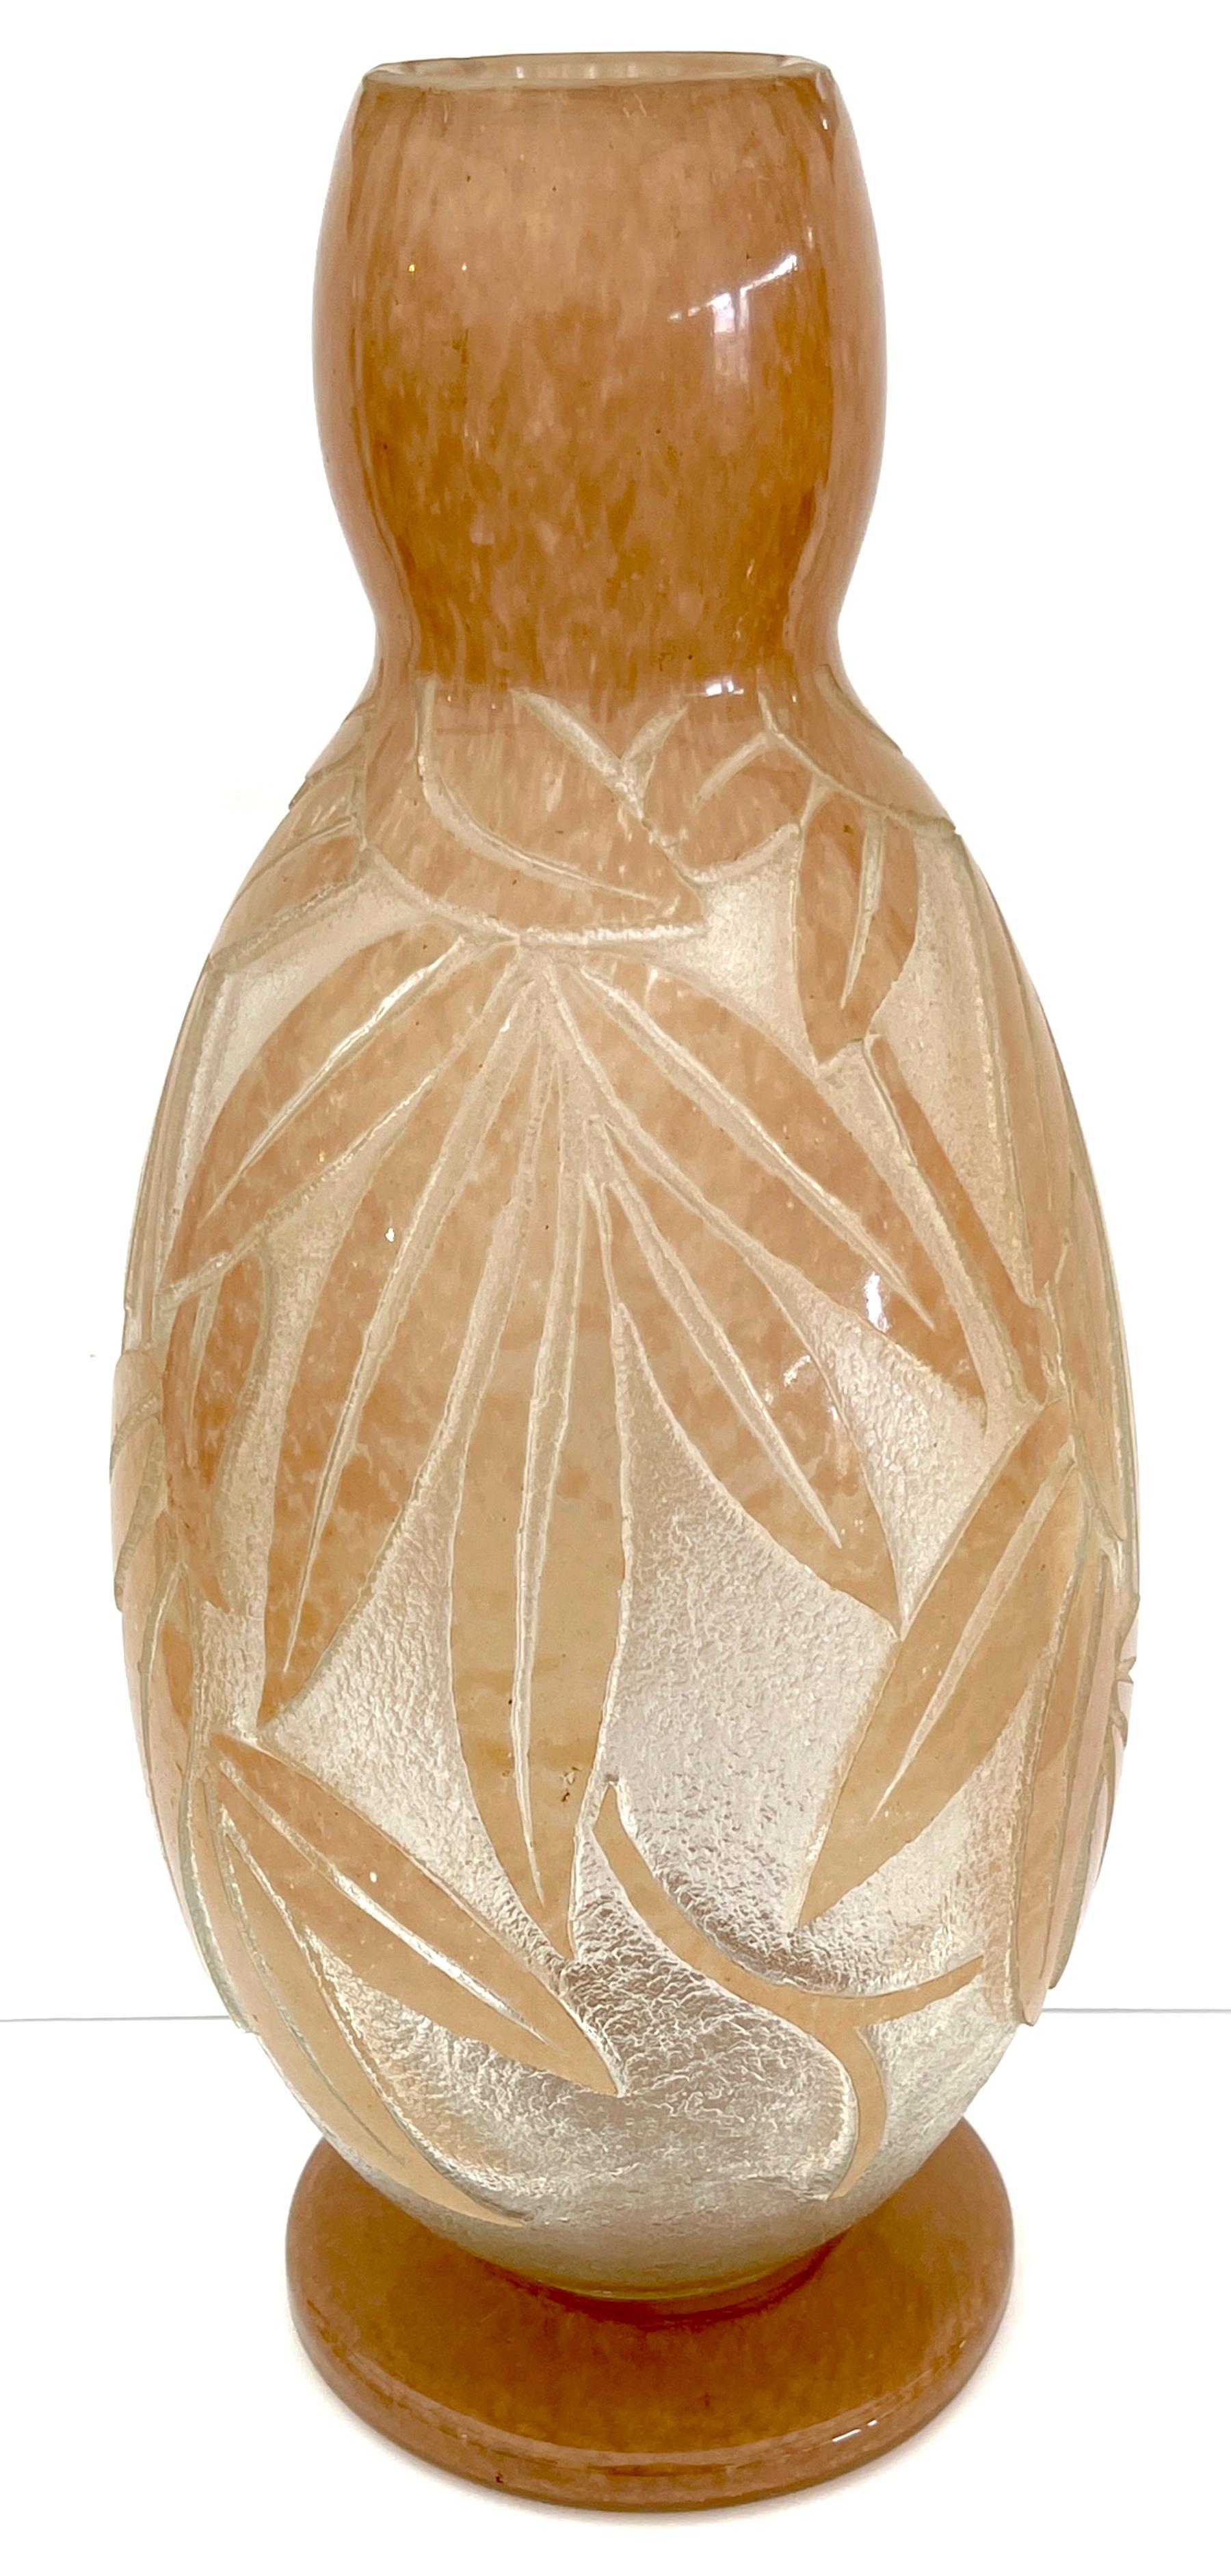 Monumental French Art Deco Palmette Cameo Glass Vase by Degué, Circa 1930s
France, Circa 1930s 

A remarkable Monumental French Art Deco Palmette Cameo Glass Vase made by Degué glassworks from the 1930s. This exquisite French Cameo glass vase